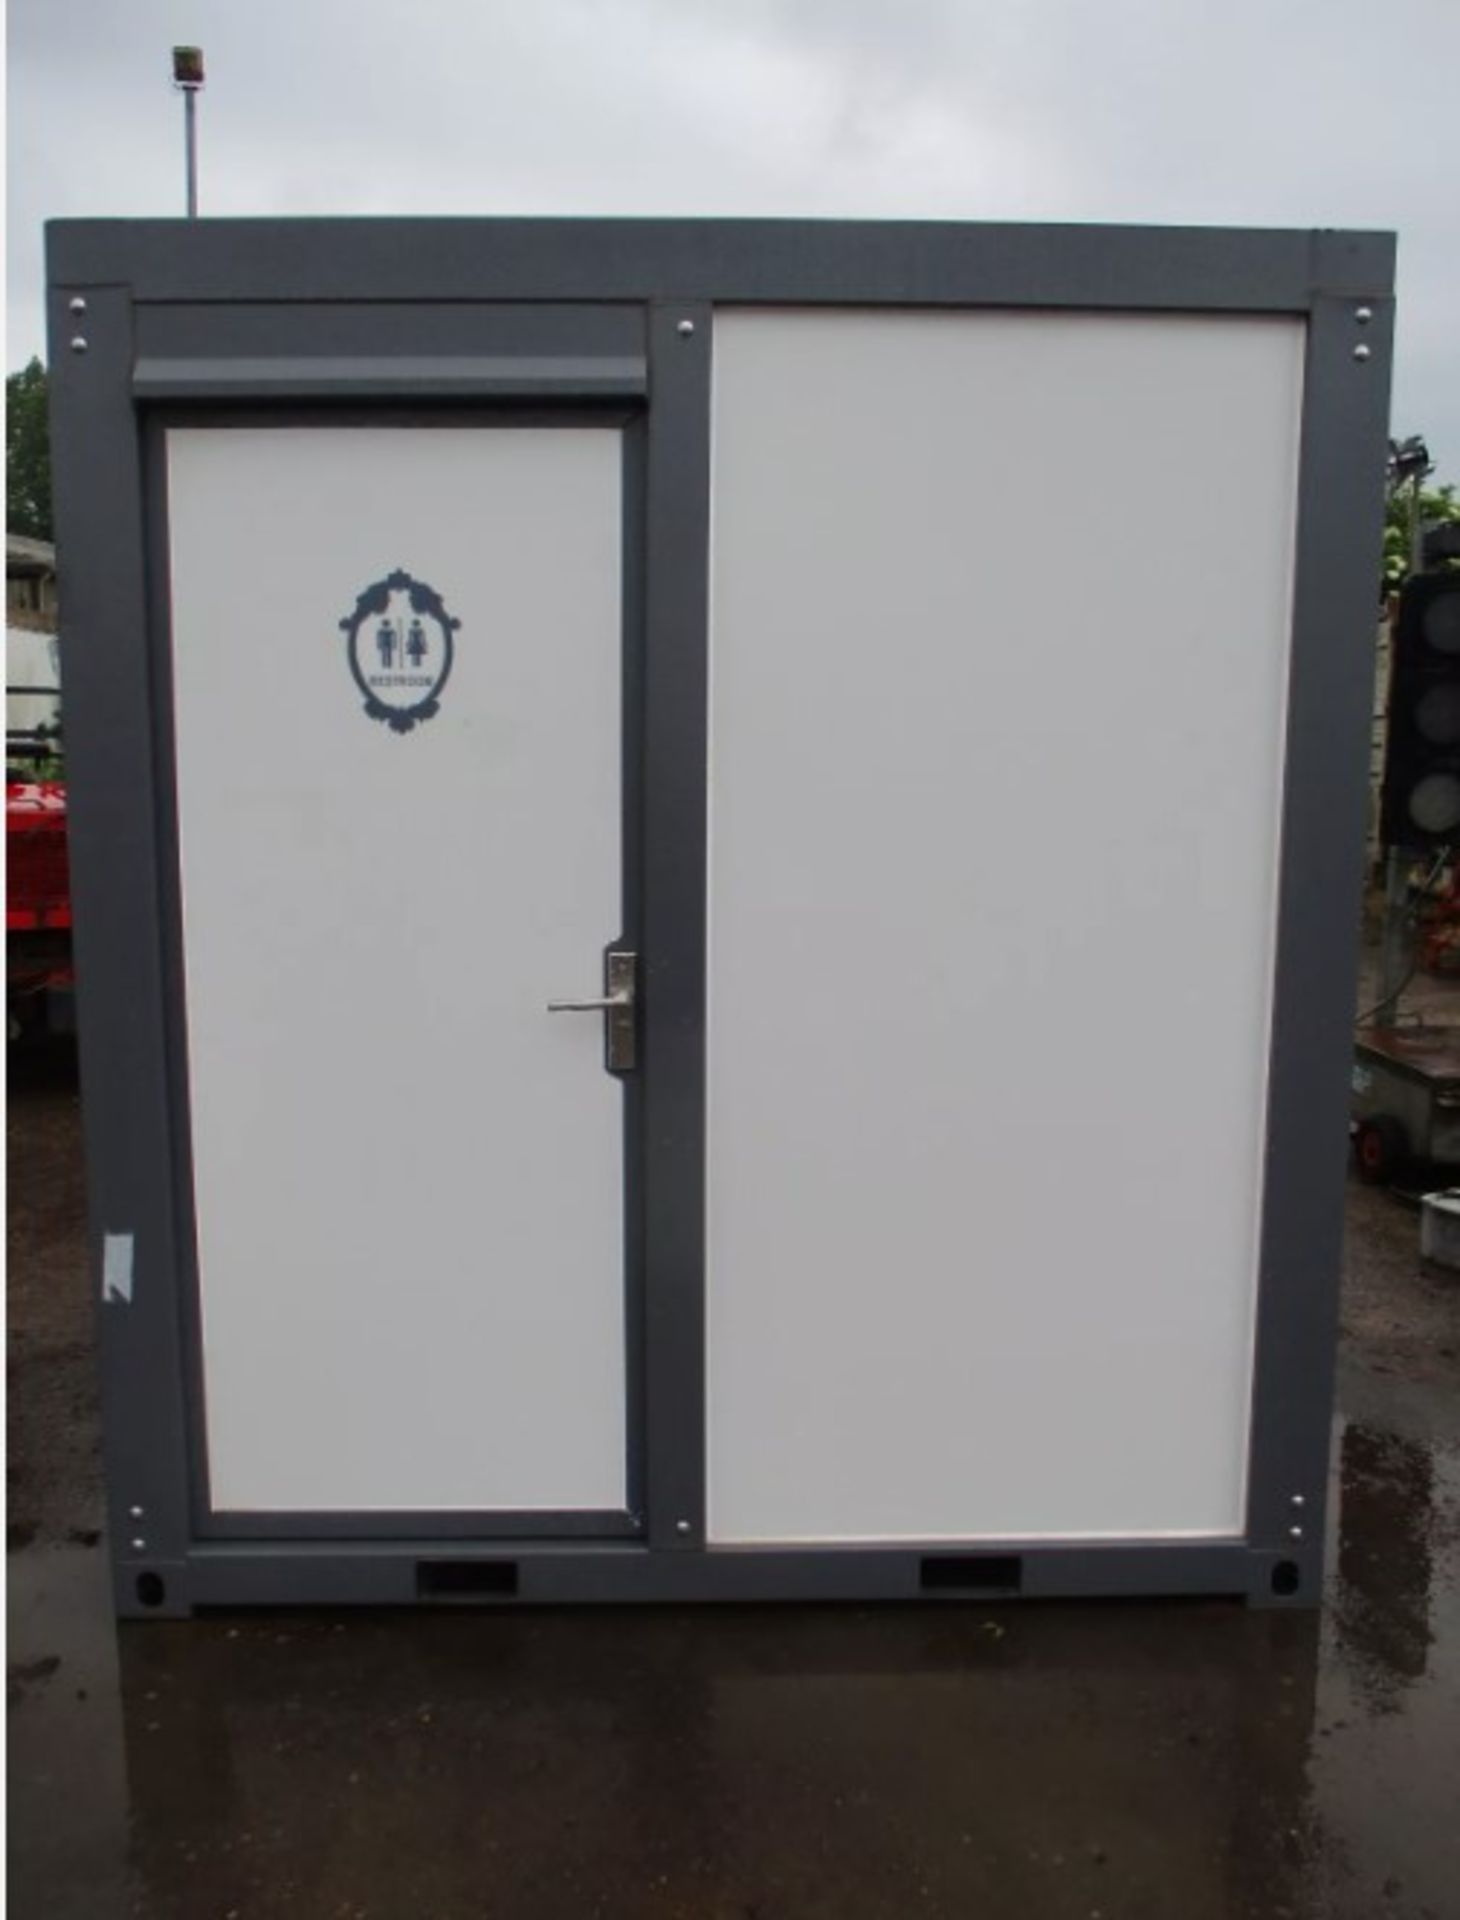 SHIPPING CONTAINER SHOWER/TOILET BLOCK - COMPACT AND CONVENIENT